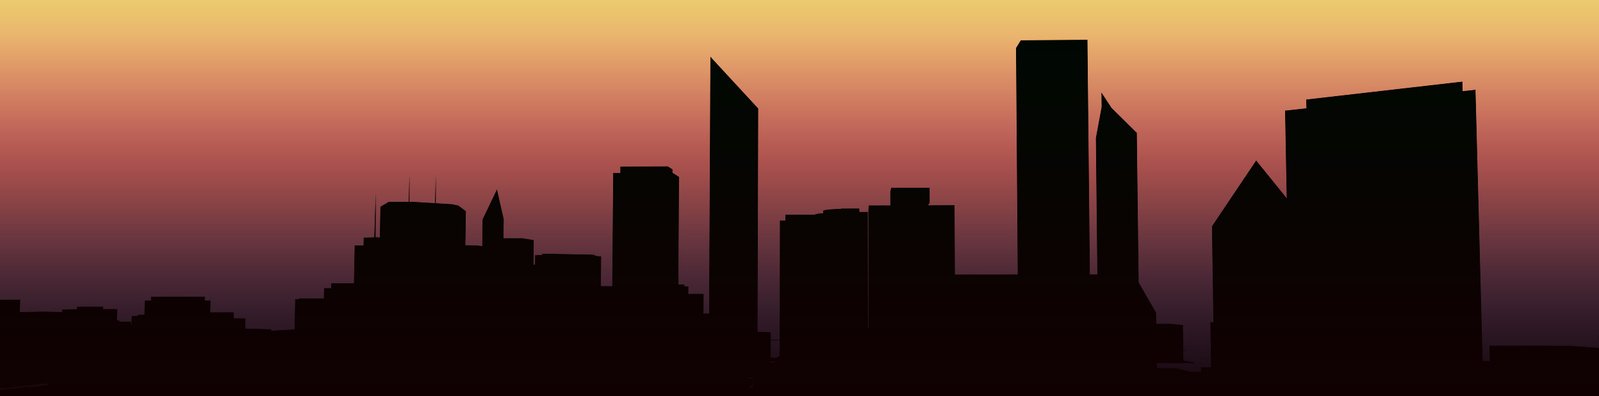 black city silhouette against a pink sky at sunset